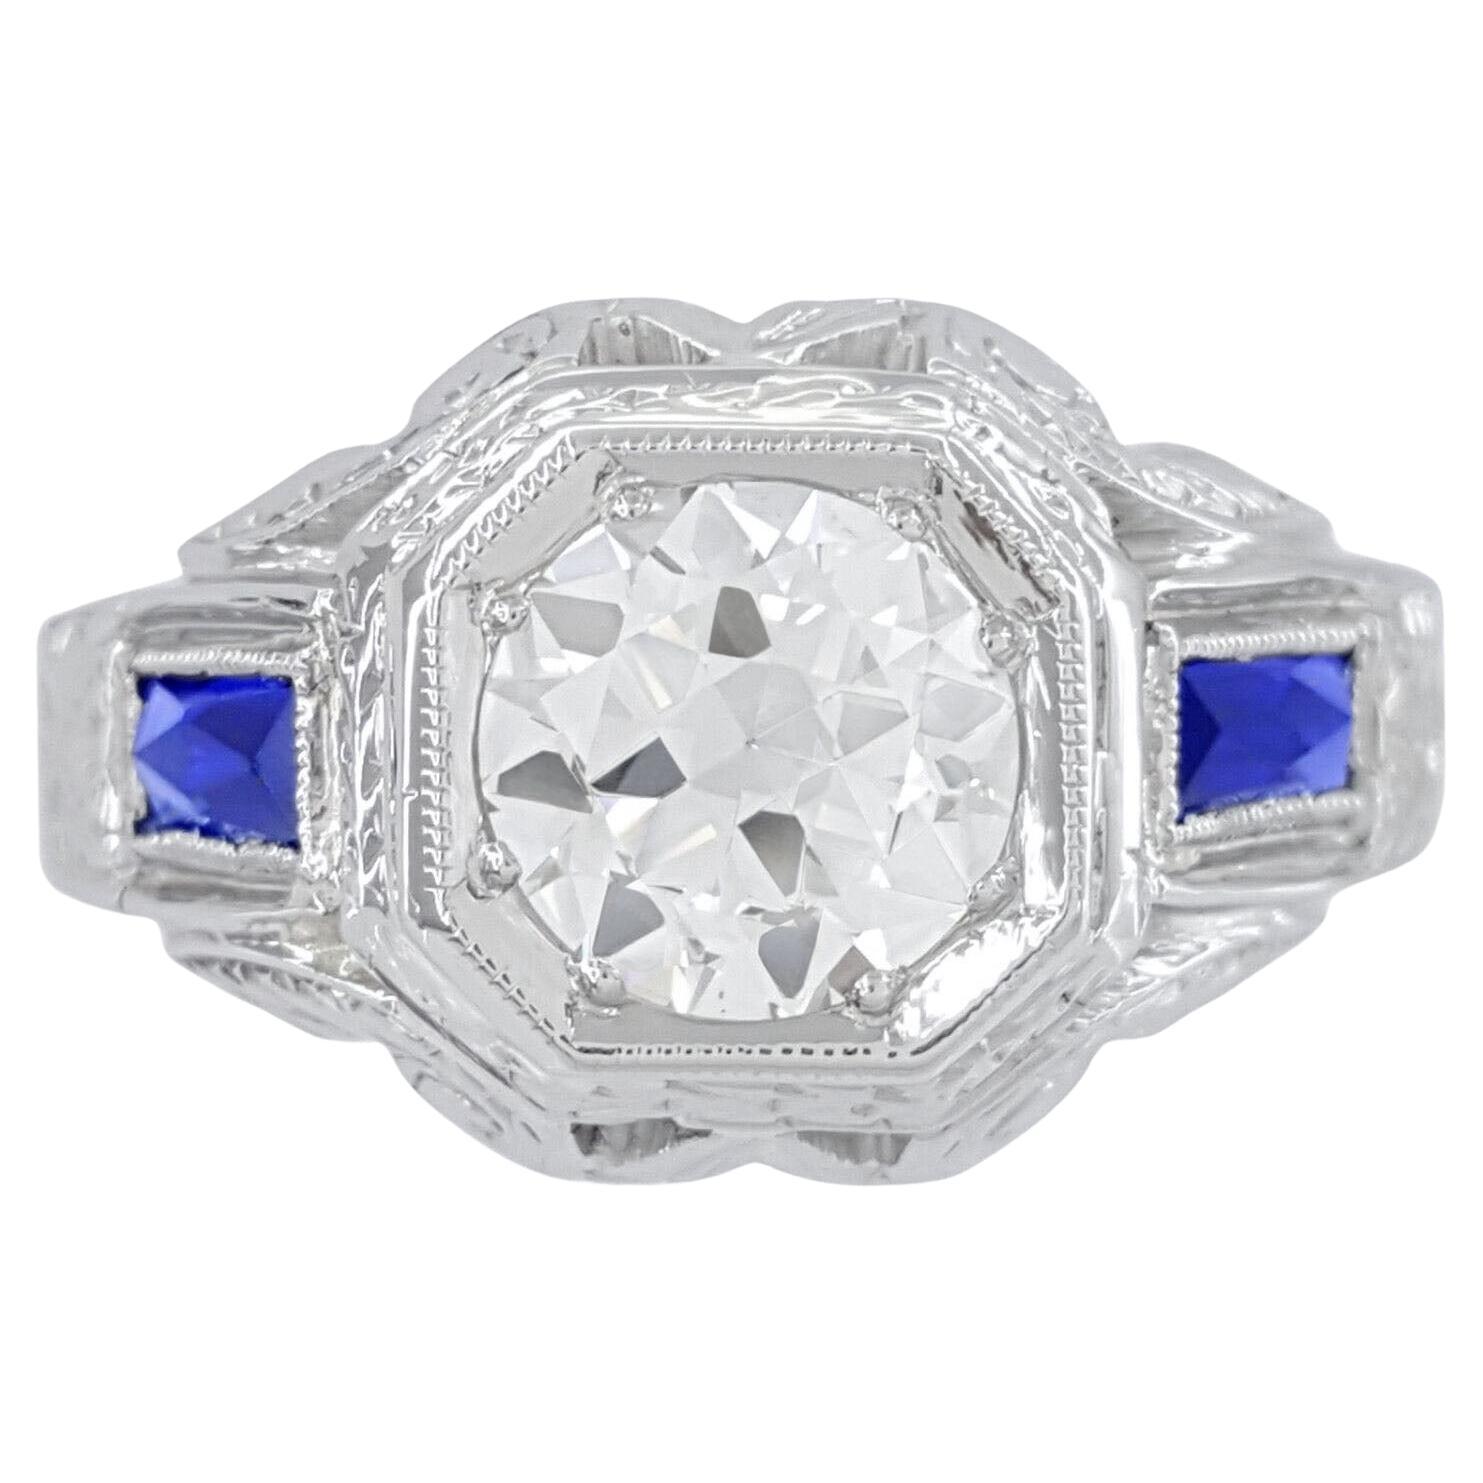 Vintage 1.30 Carat Transitional Round Diamond and Sapphire Art Deco Ring For Sale